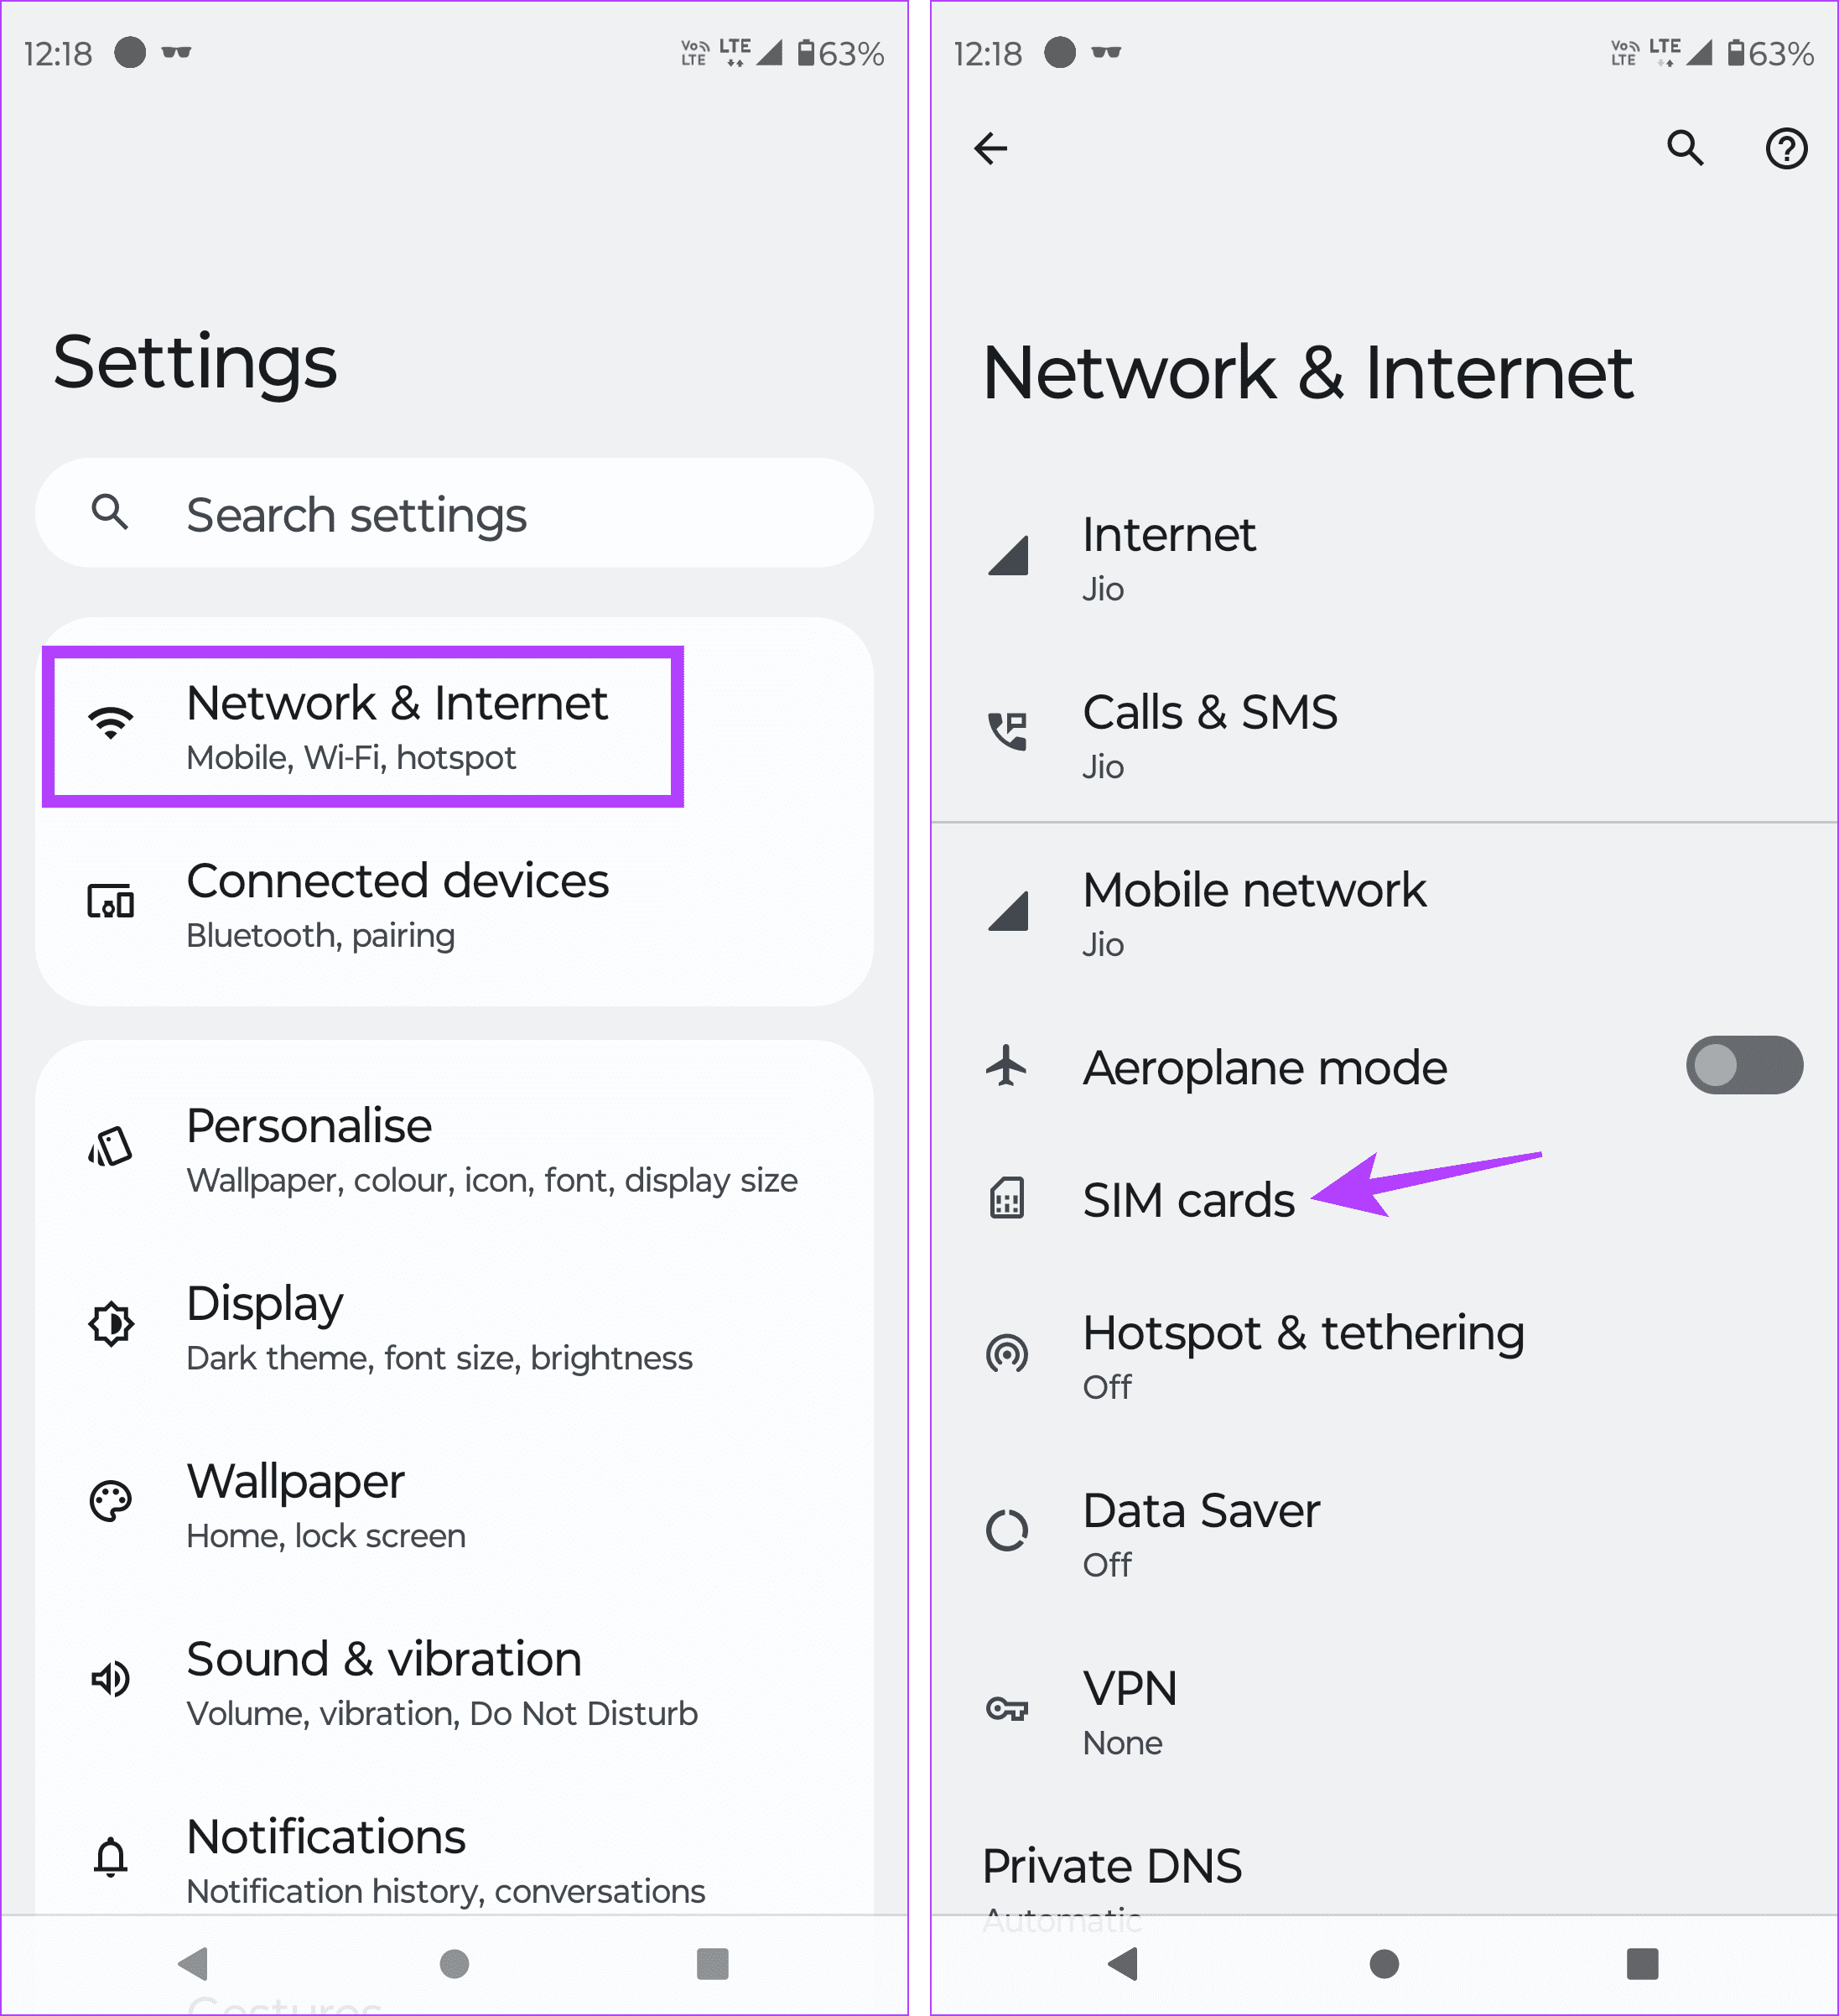 Open network and internet settings